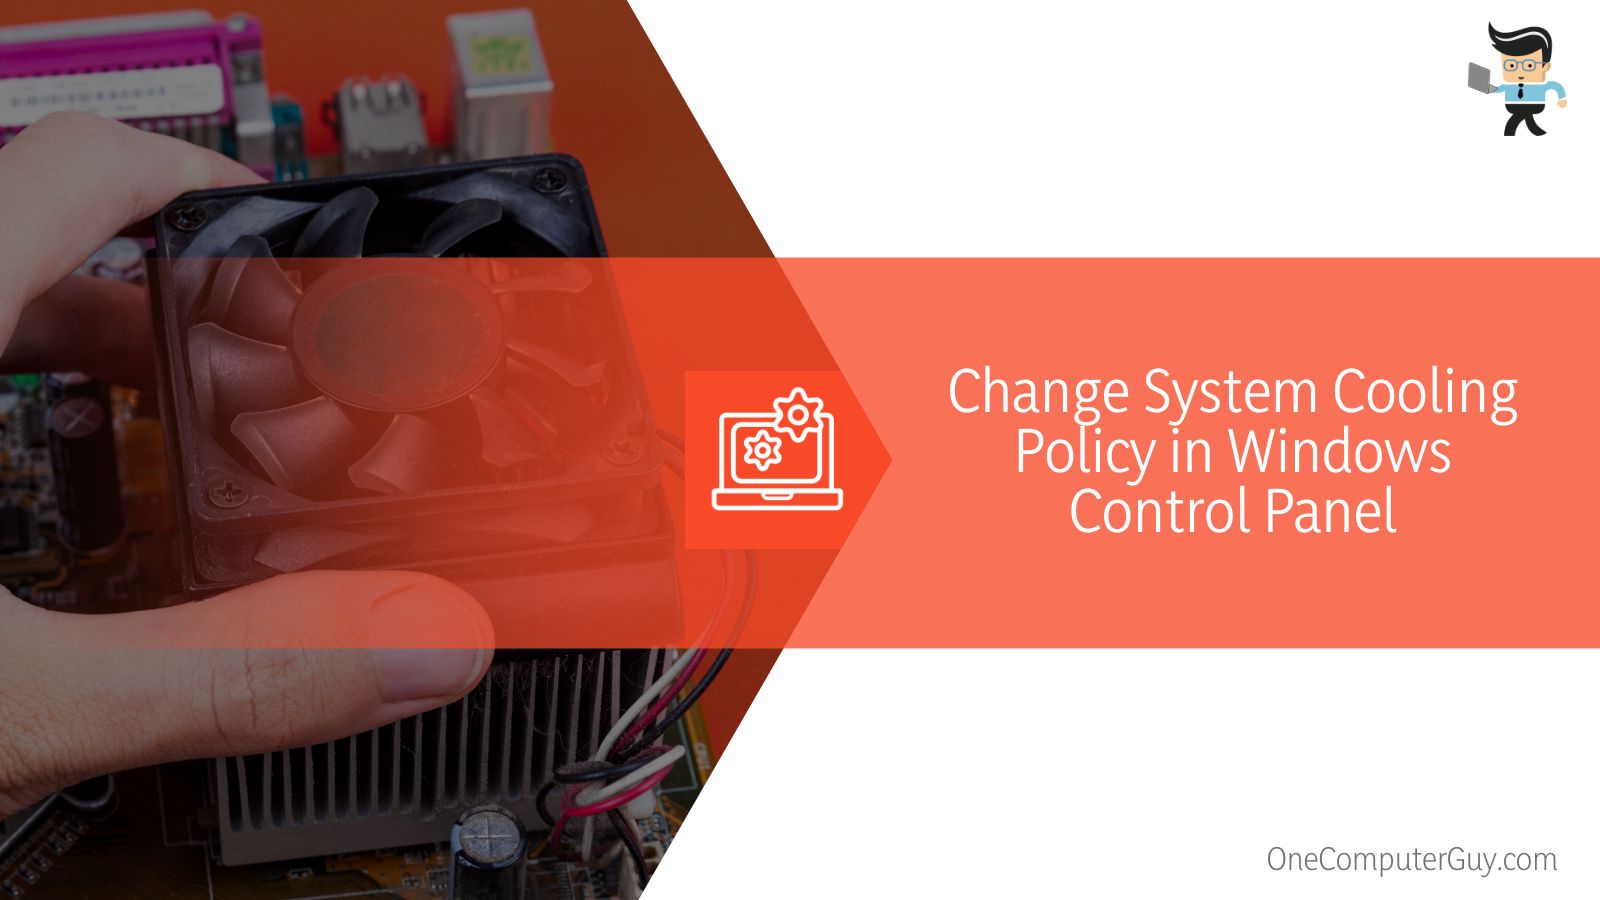 Change System Cooling Policy in Windows Control Panel